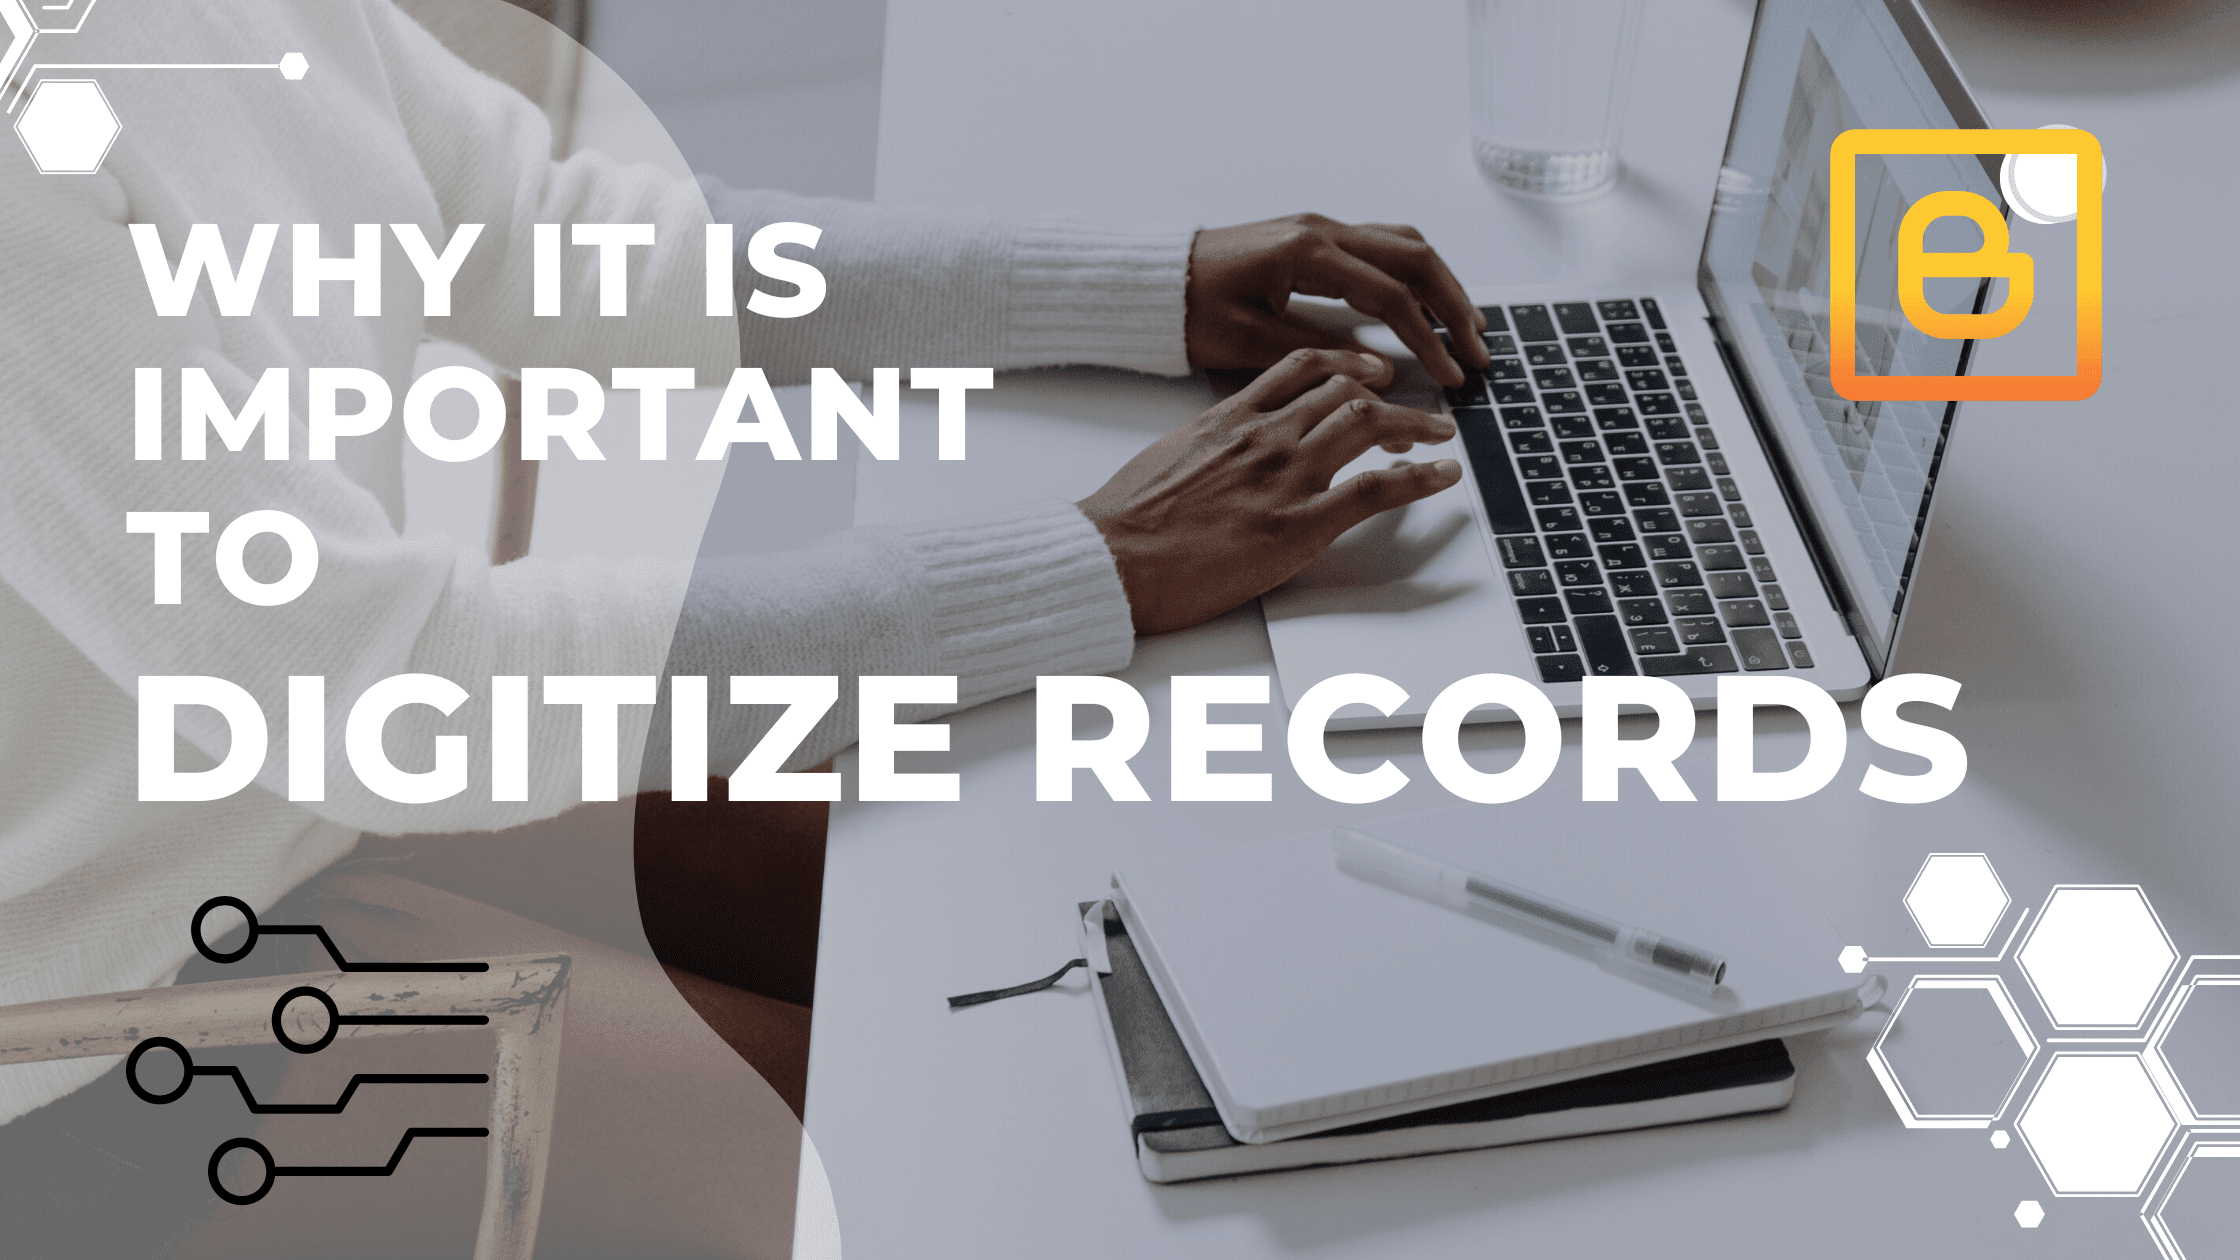 Why It Is Important to Digitize Records